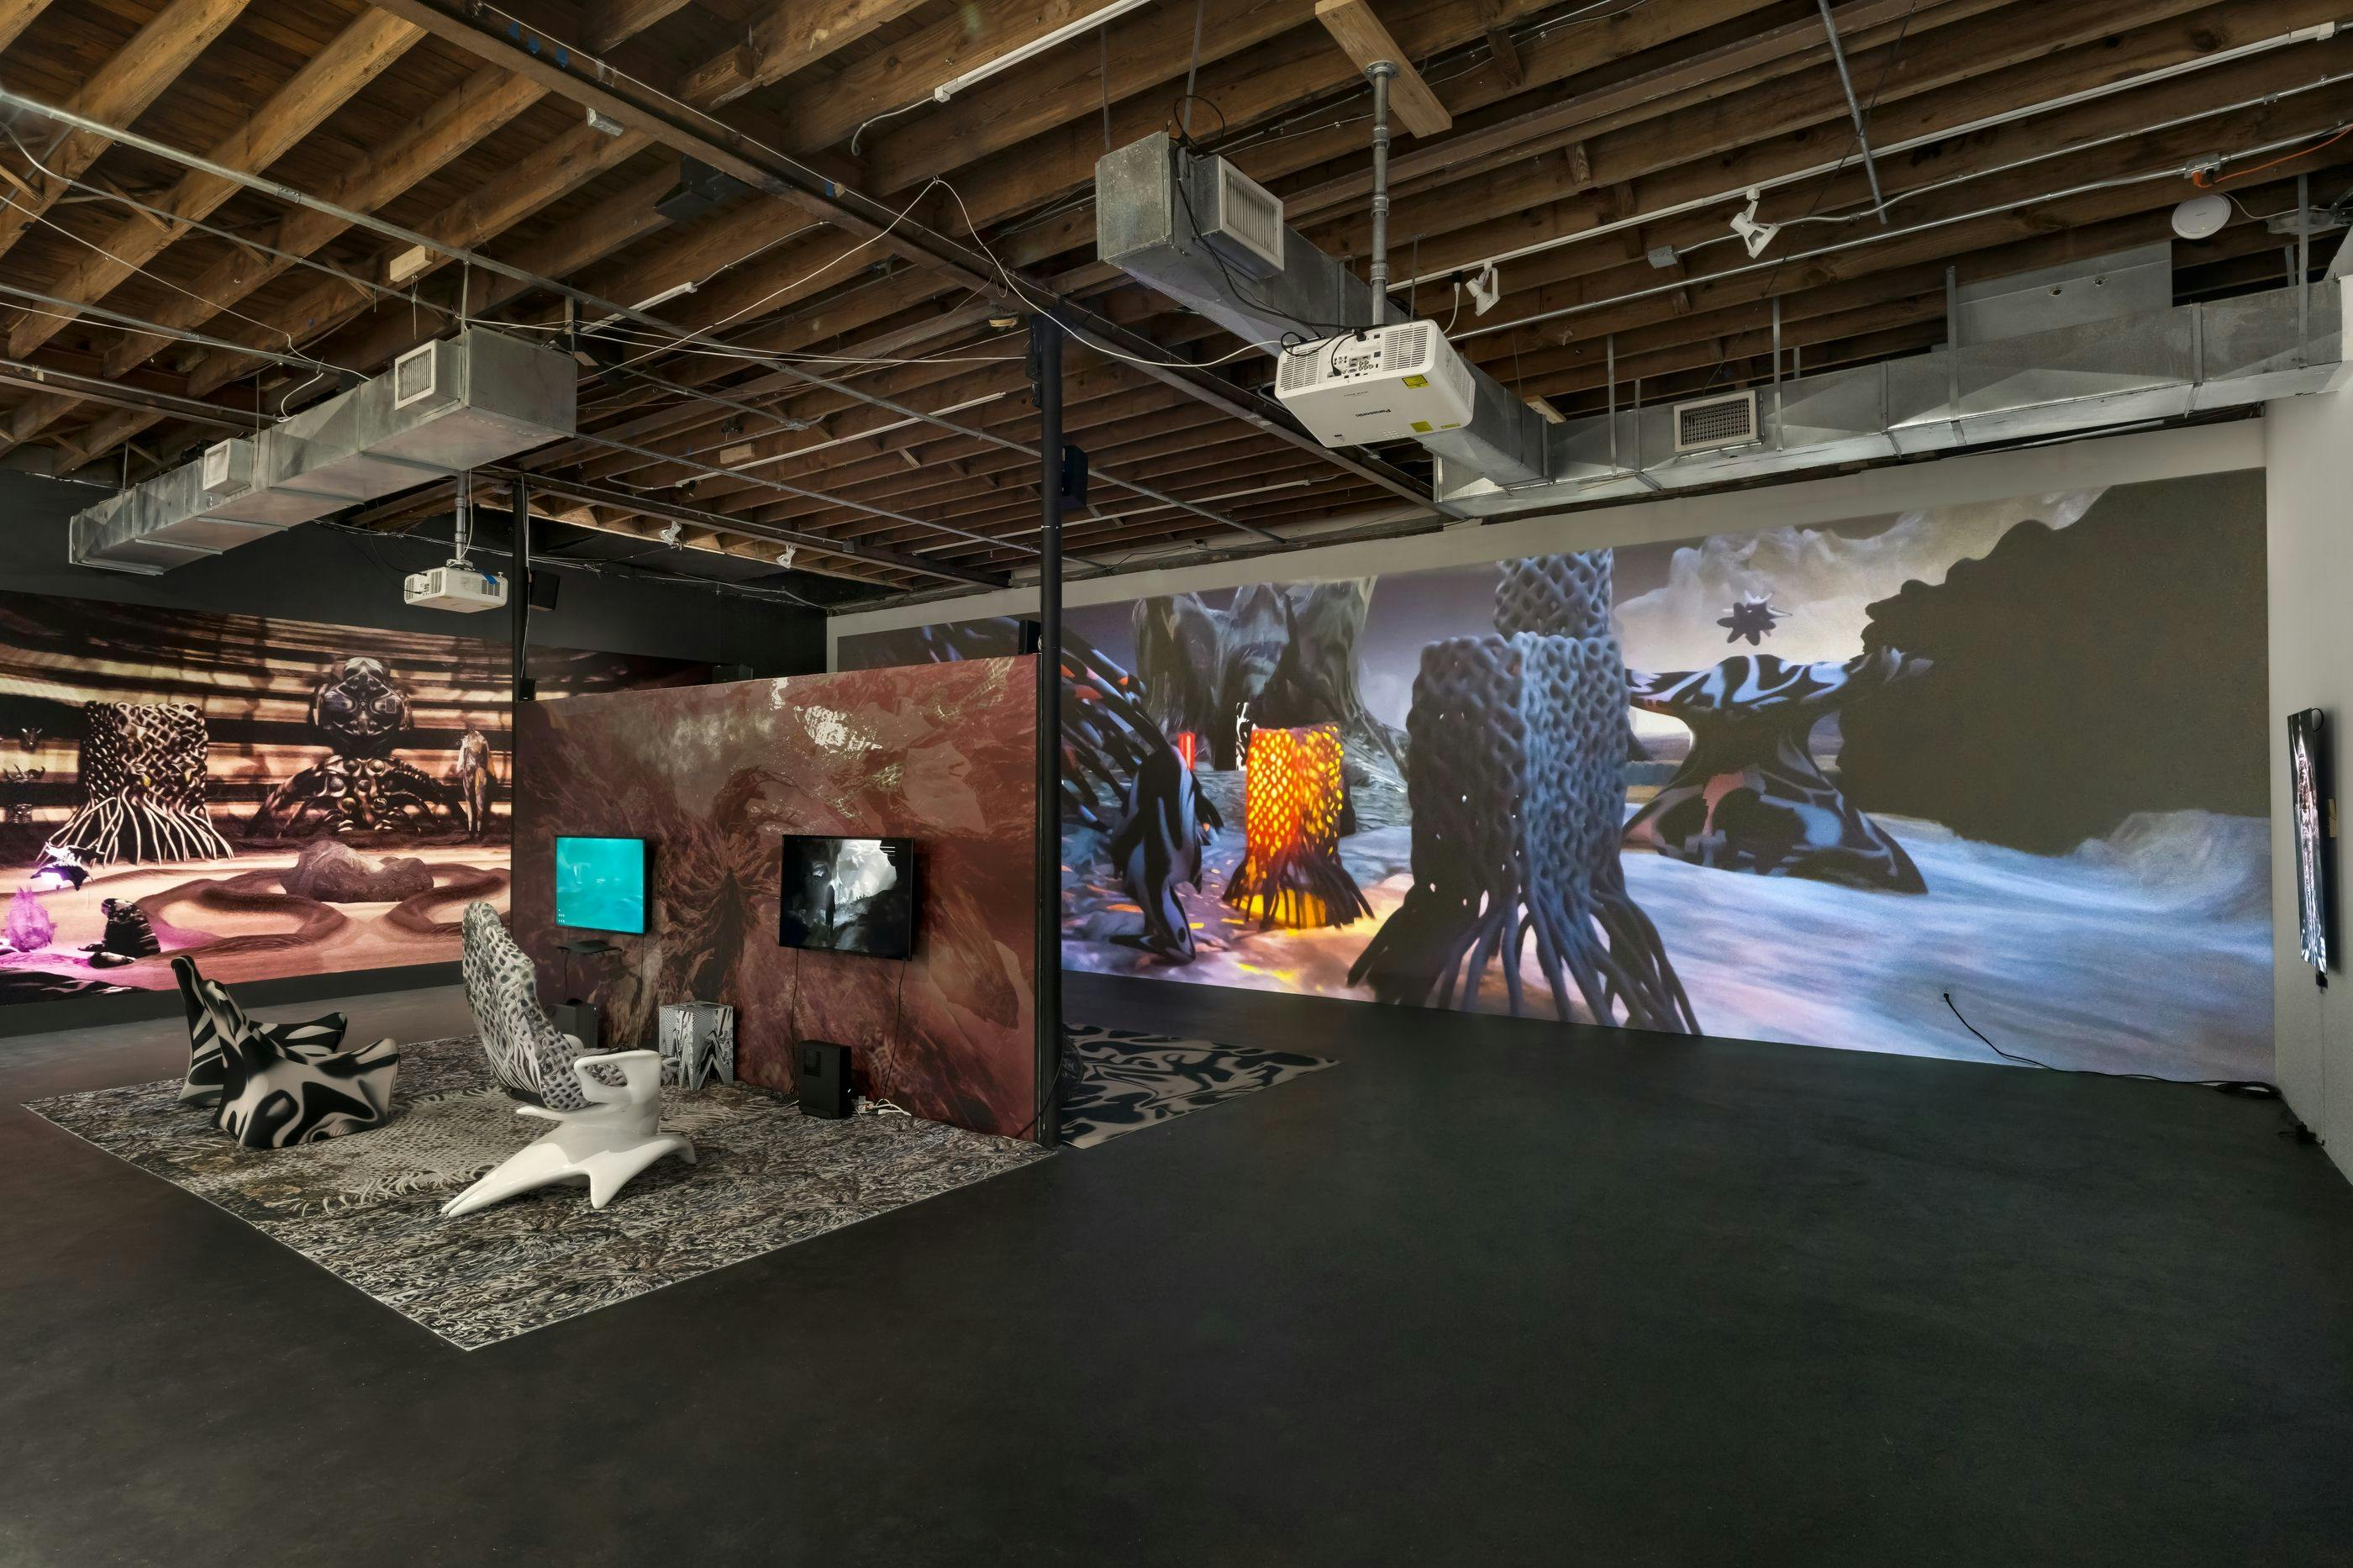 An installation view of a gallery show in a large room with tall ceilings: in the background is a wall-sized projection of a video game, depicting a surreal, abstracted landscape, and in the foreground is a temporary wall outfitted with an amorphous texture, and television monitors featuring two playable game demos. Nearby are biomorphic textured carpets and angular interactive gaming chairs.